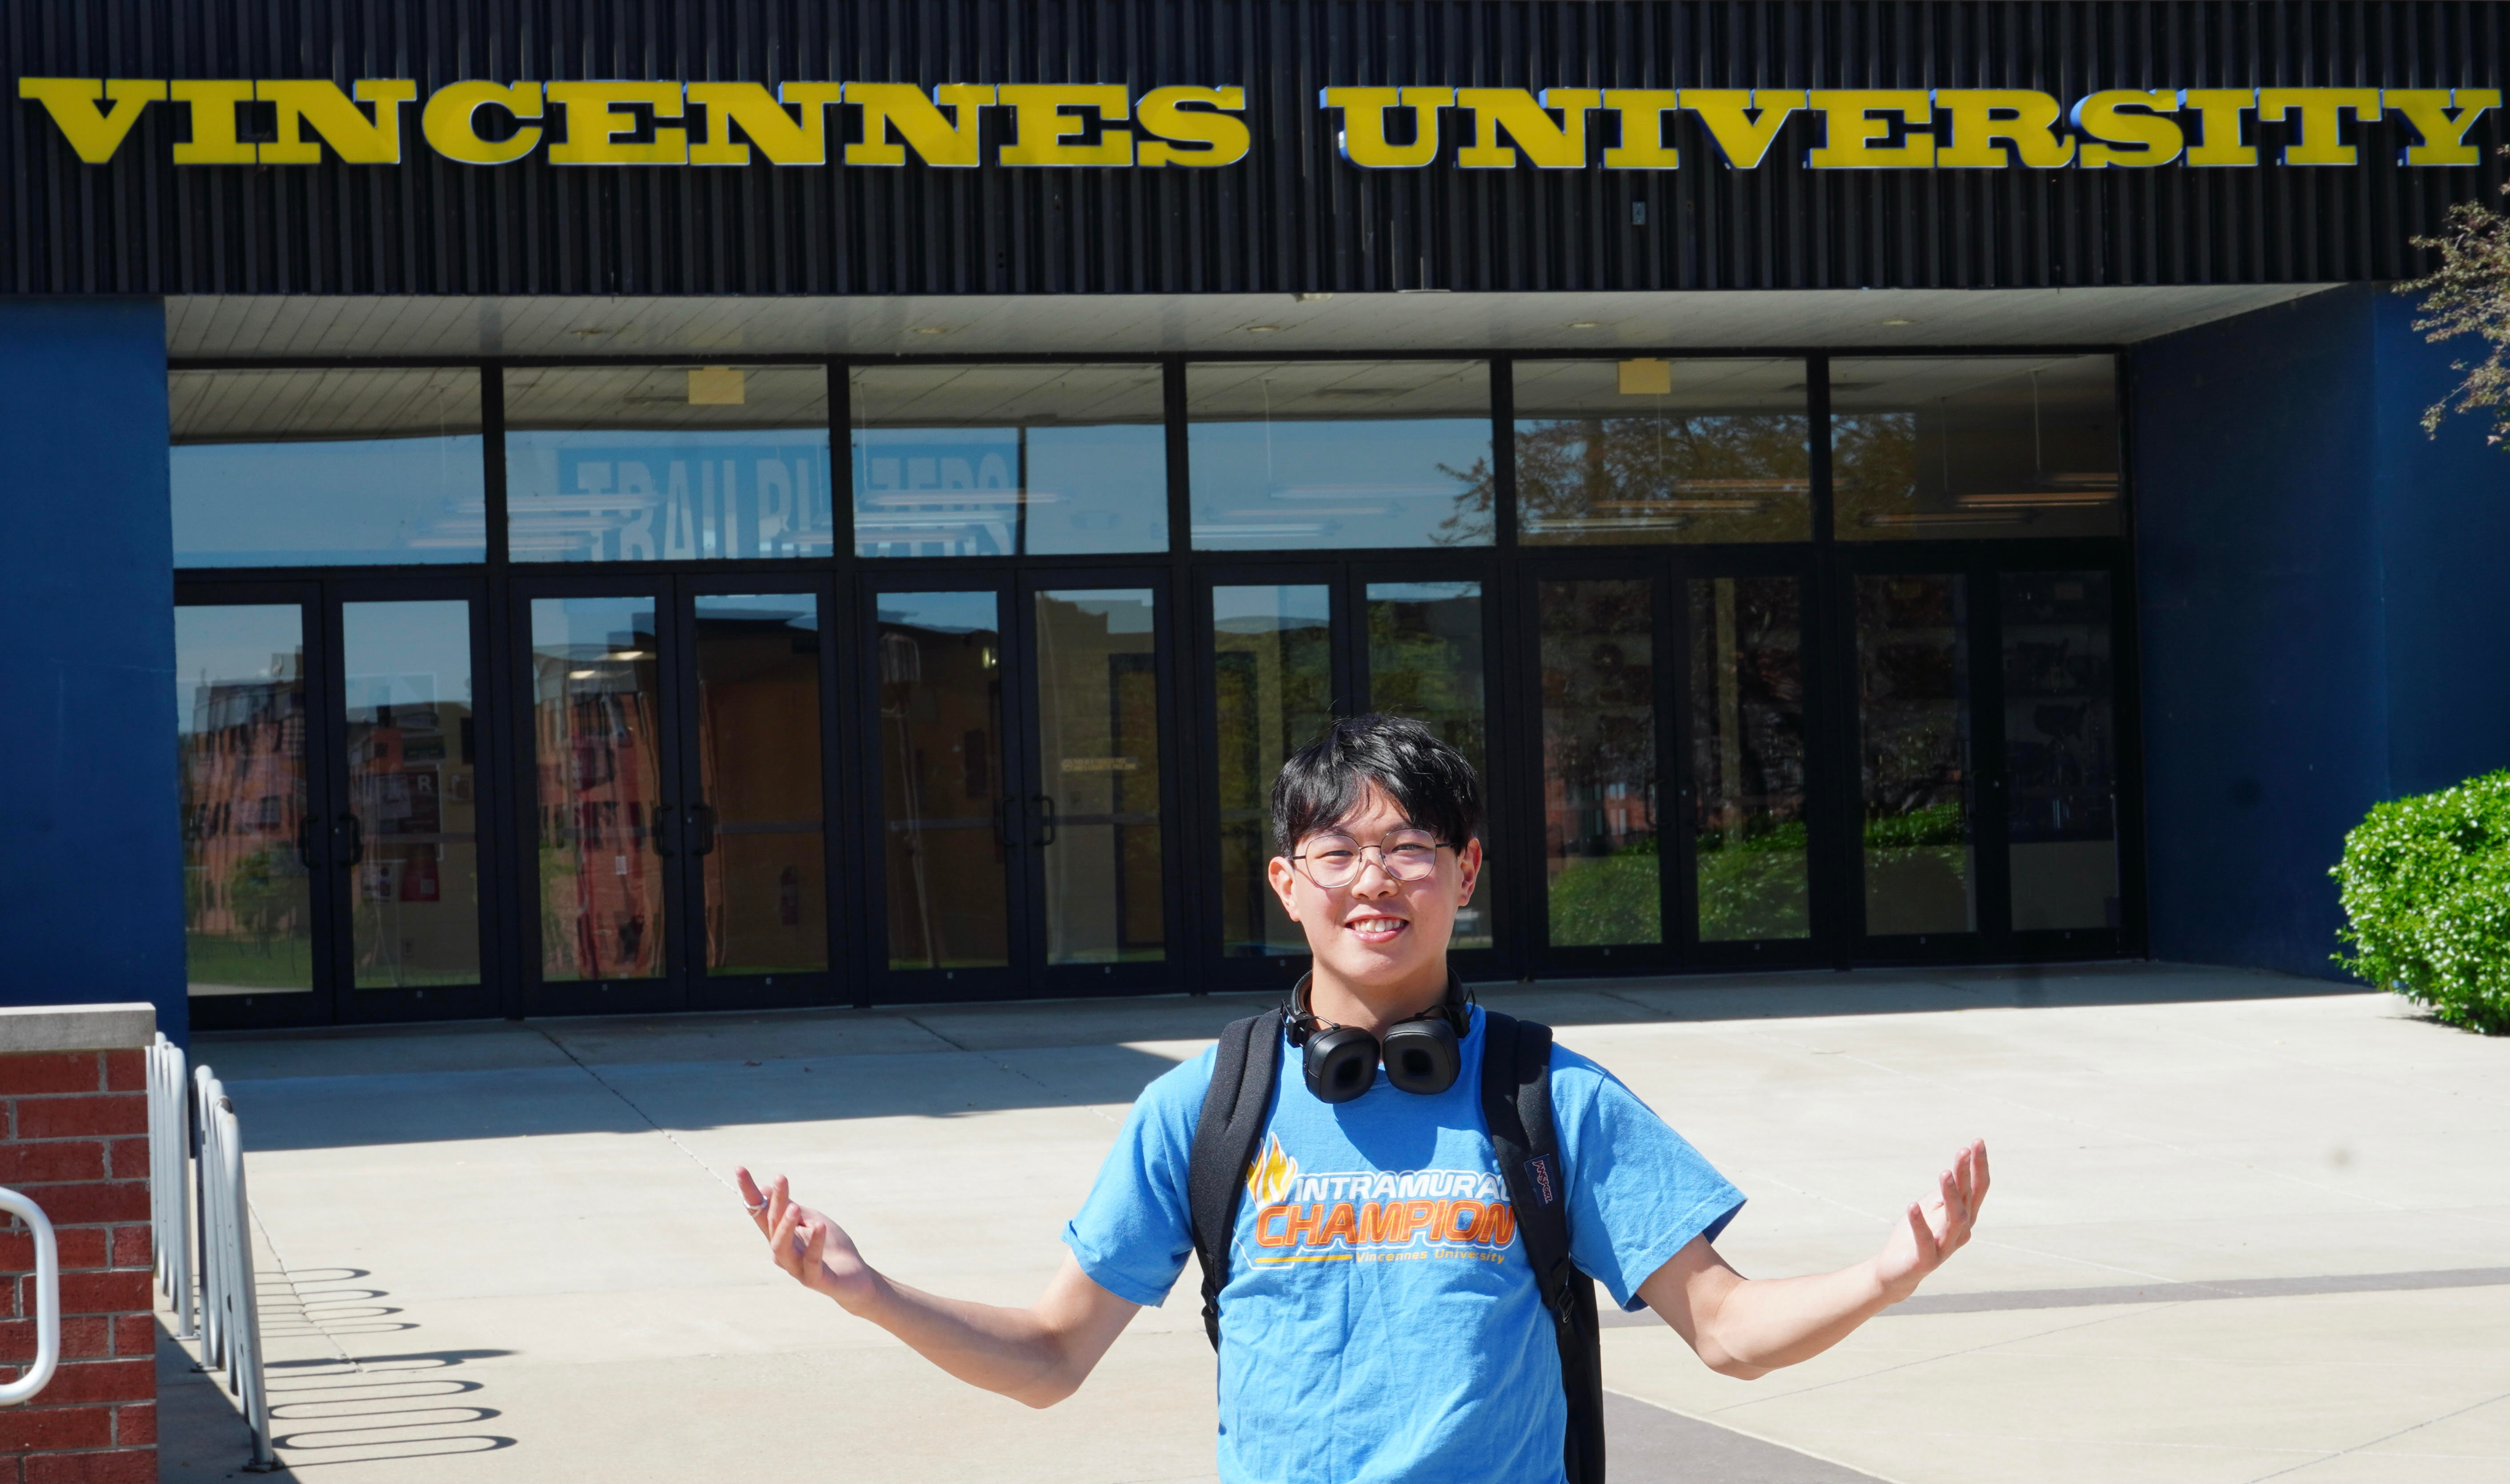 Samuel Lo stands with his arms extended in front of an entrance to the P.E. Complex. Vincennes University is displaced over the doors.er 